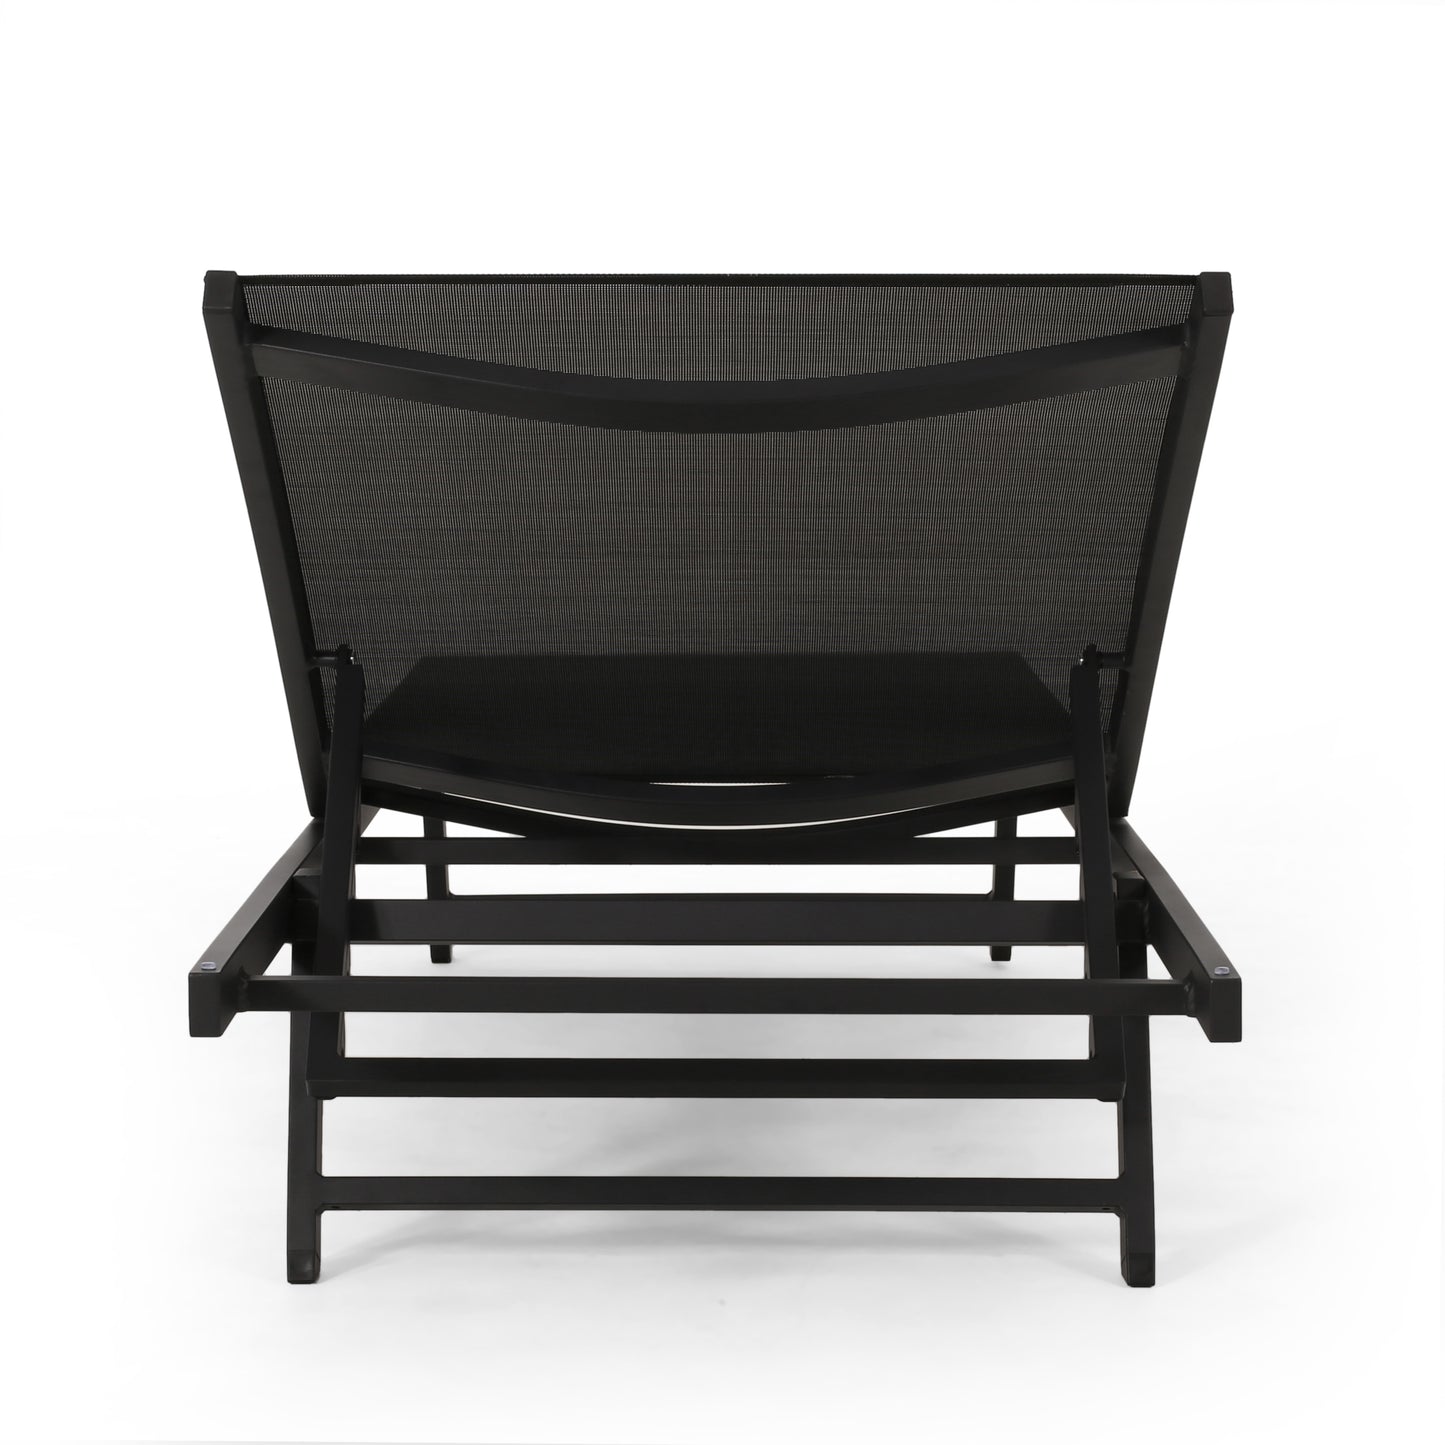 Simon Outdoor Aluminum Chaise Lounge Set with C-Shaped End Table